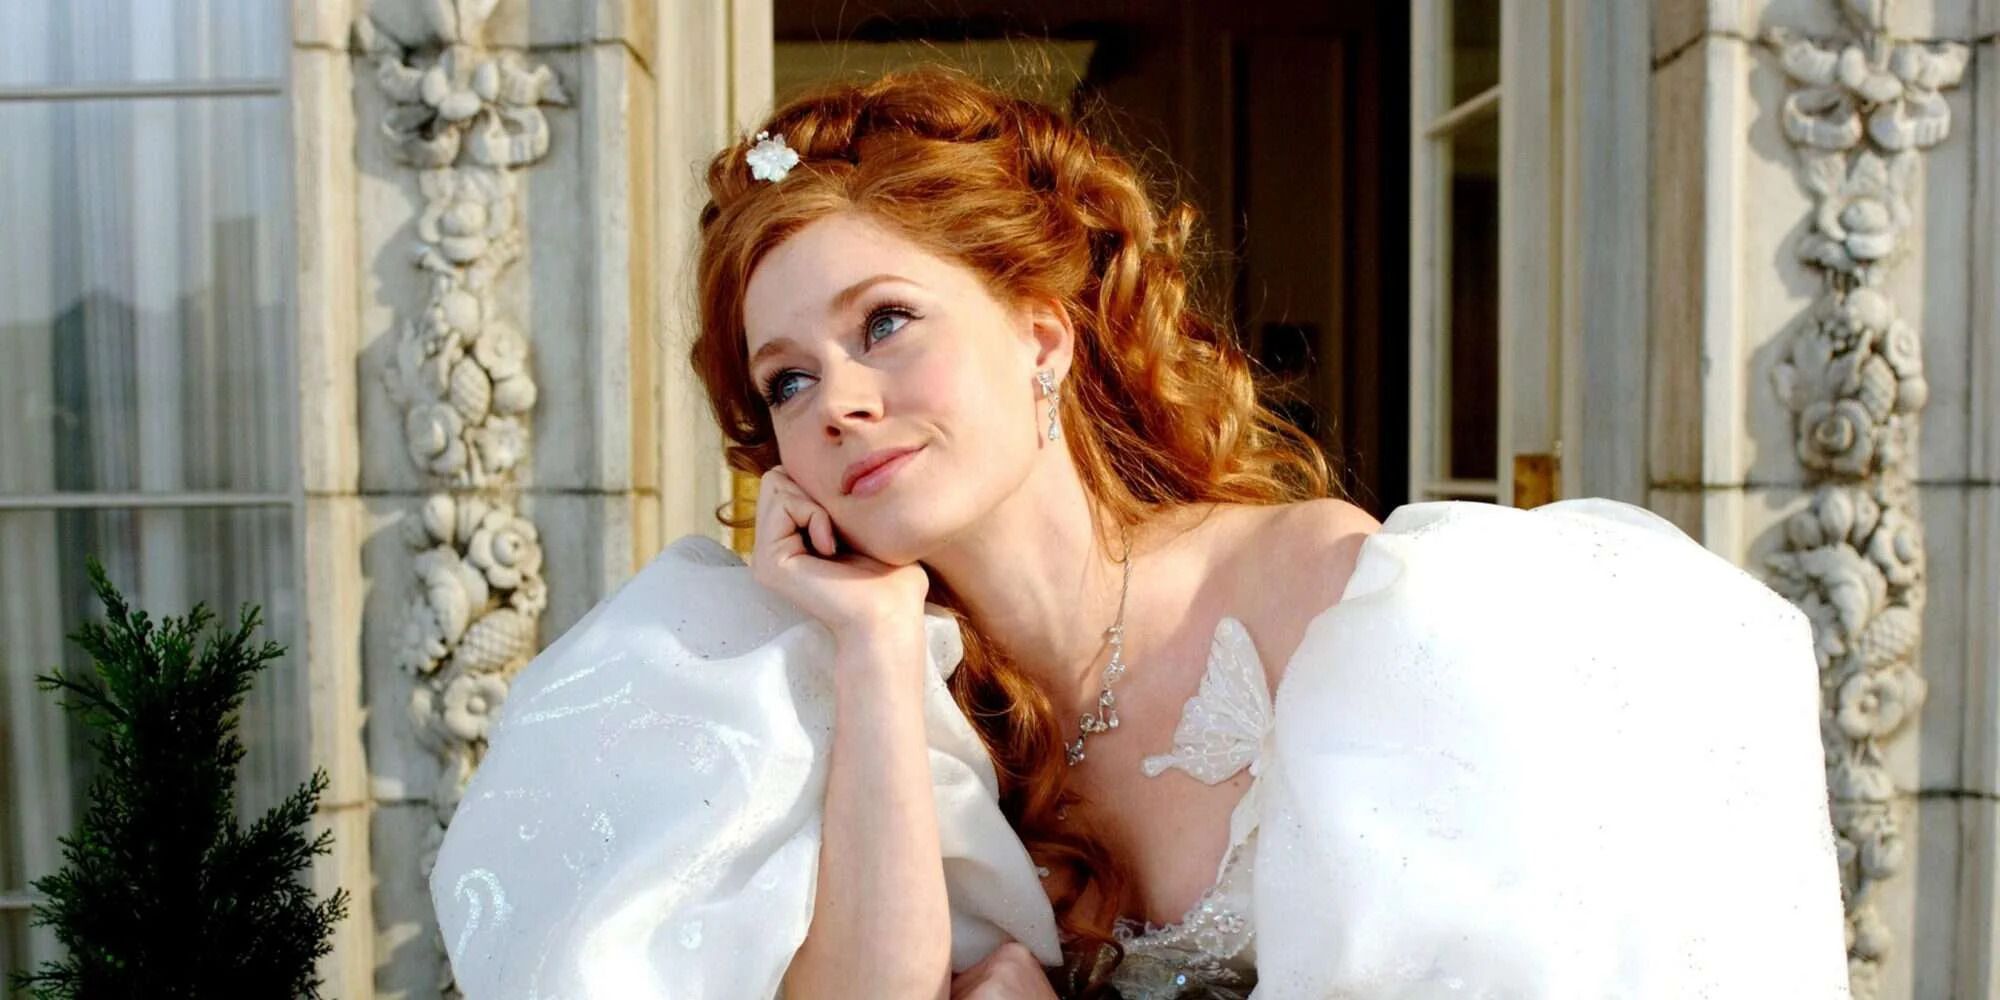 Giselle on a balcony with a dreamy expression on her face in Enchanted.